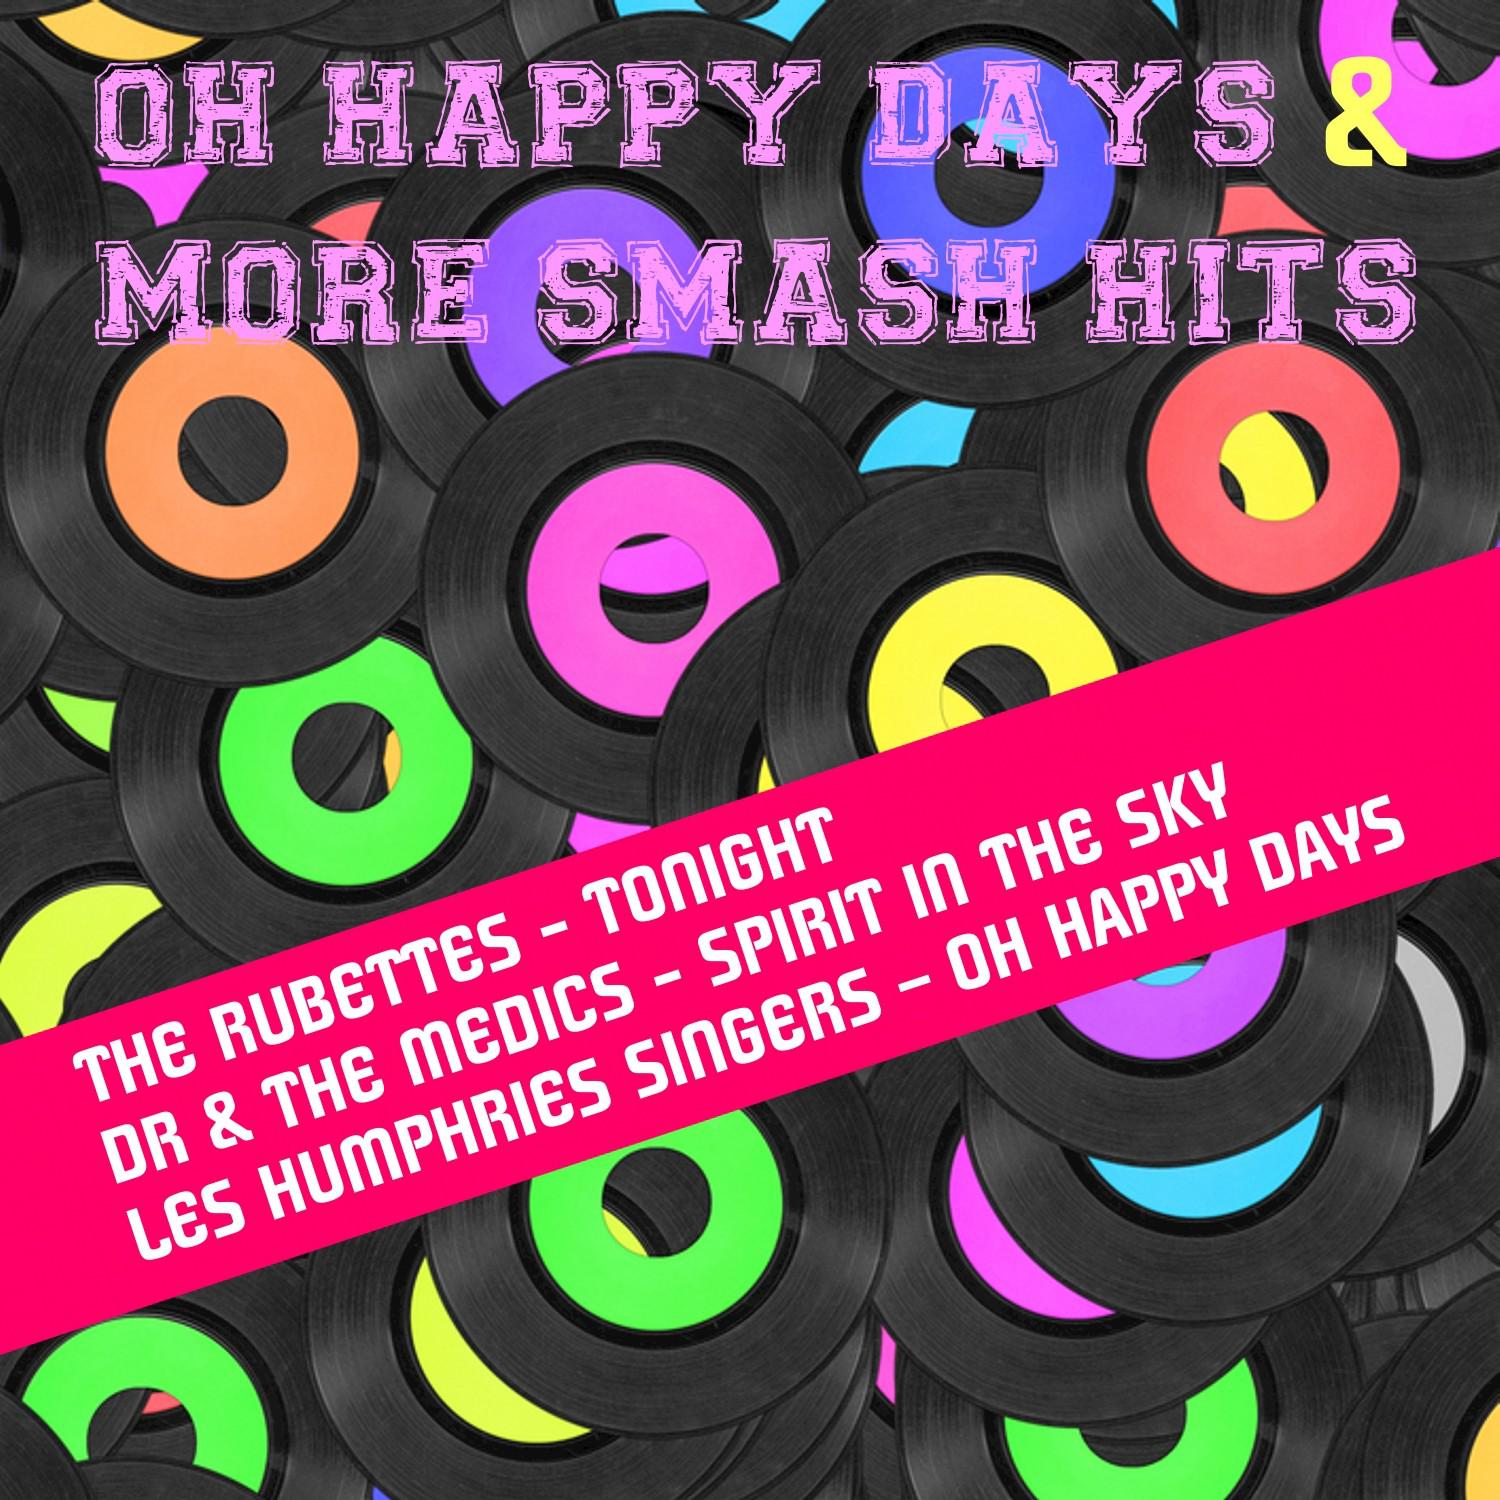 Oh Happy Days + More Smash Hits